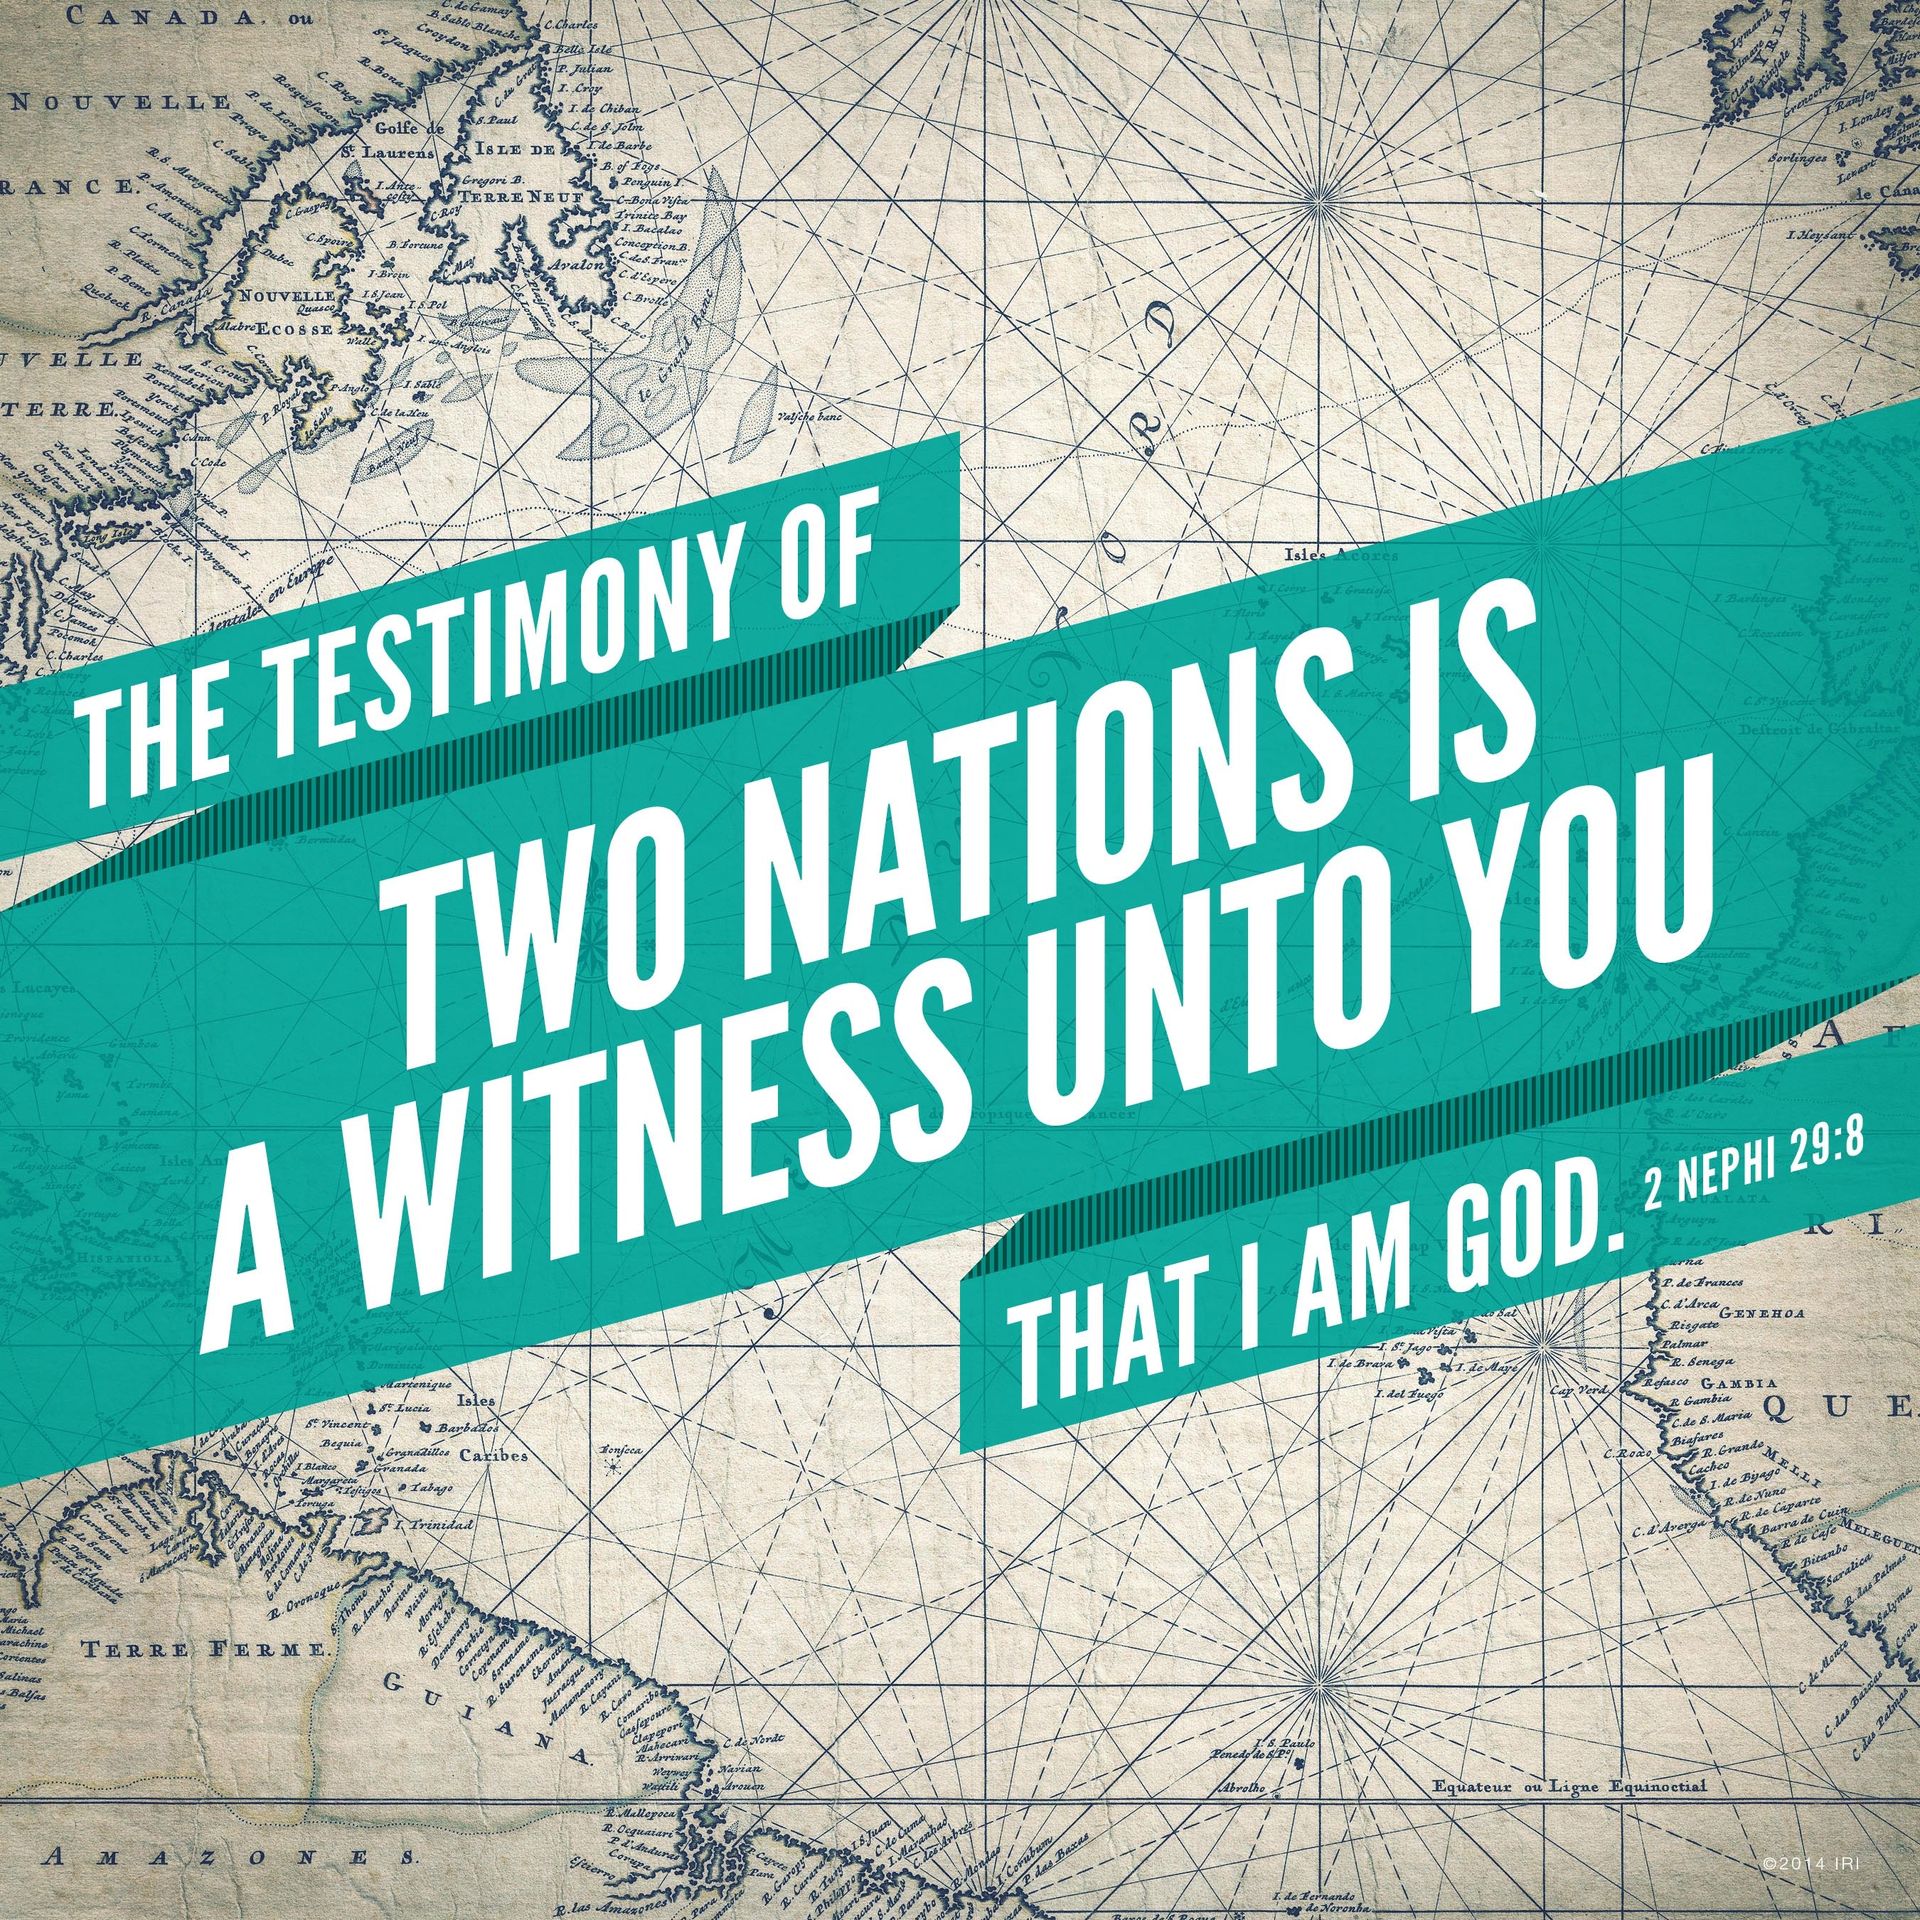 “The testimony of two nations is a witness unto you that I am God.”—2 Nephi 29:8